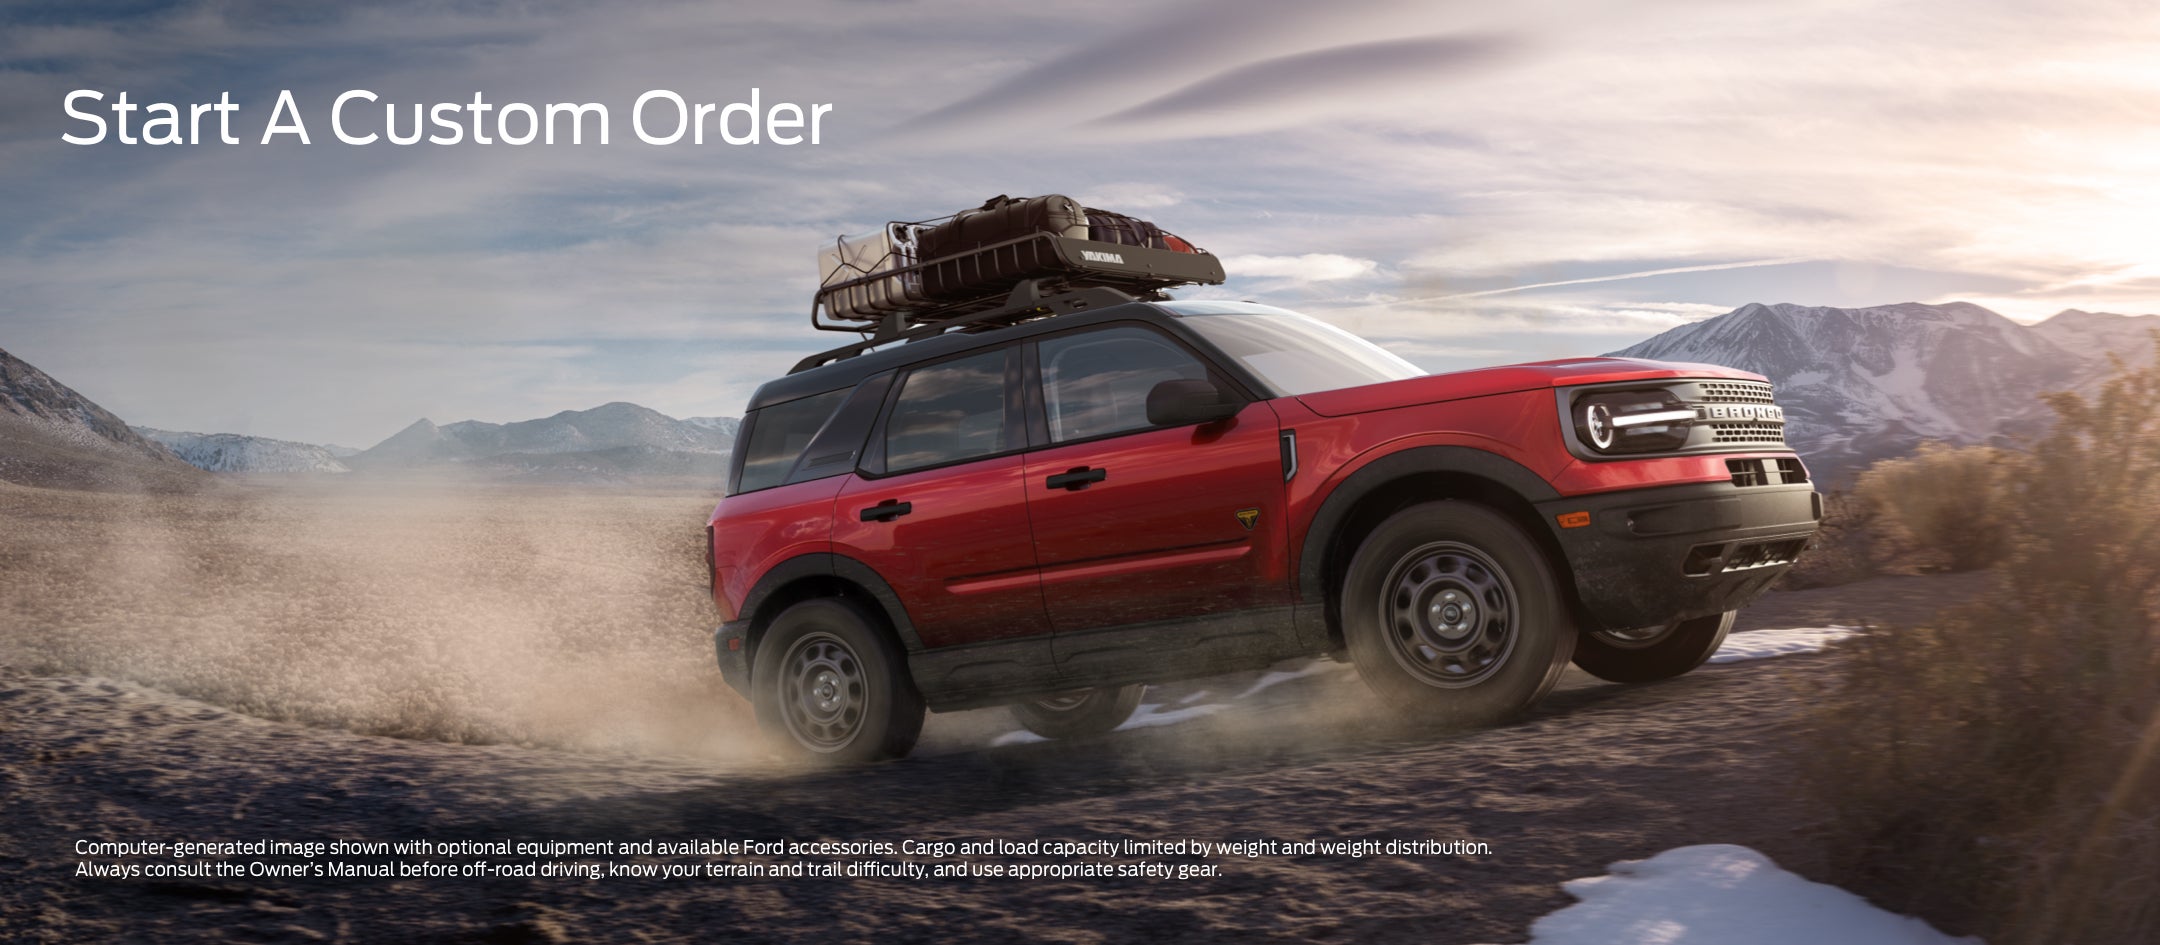 Start a custom order | McKie Ford Lincoln in Rapid City SD